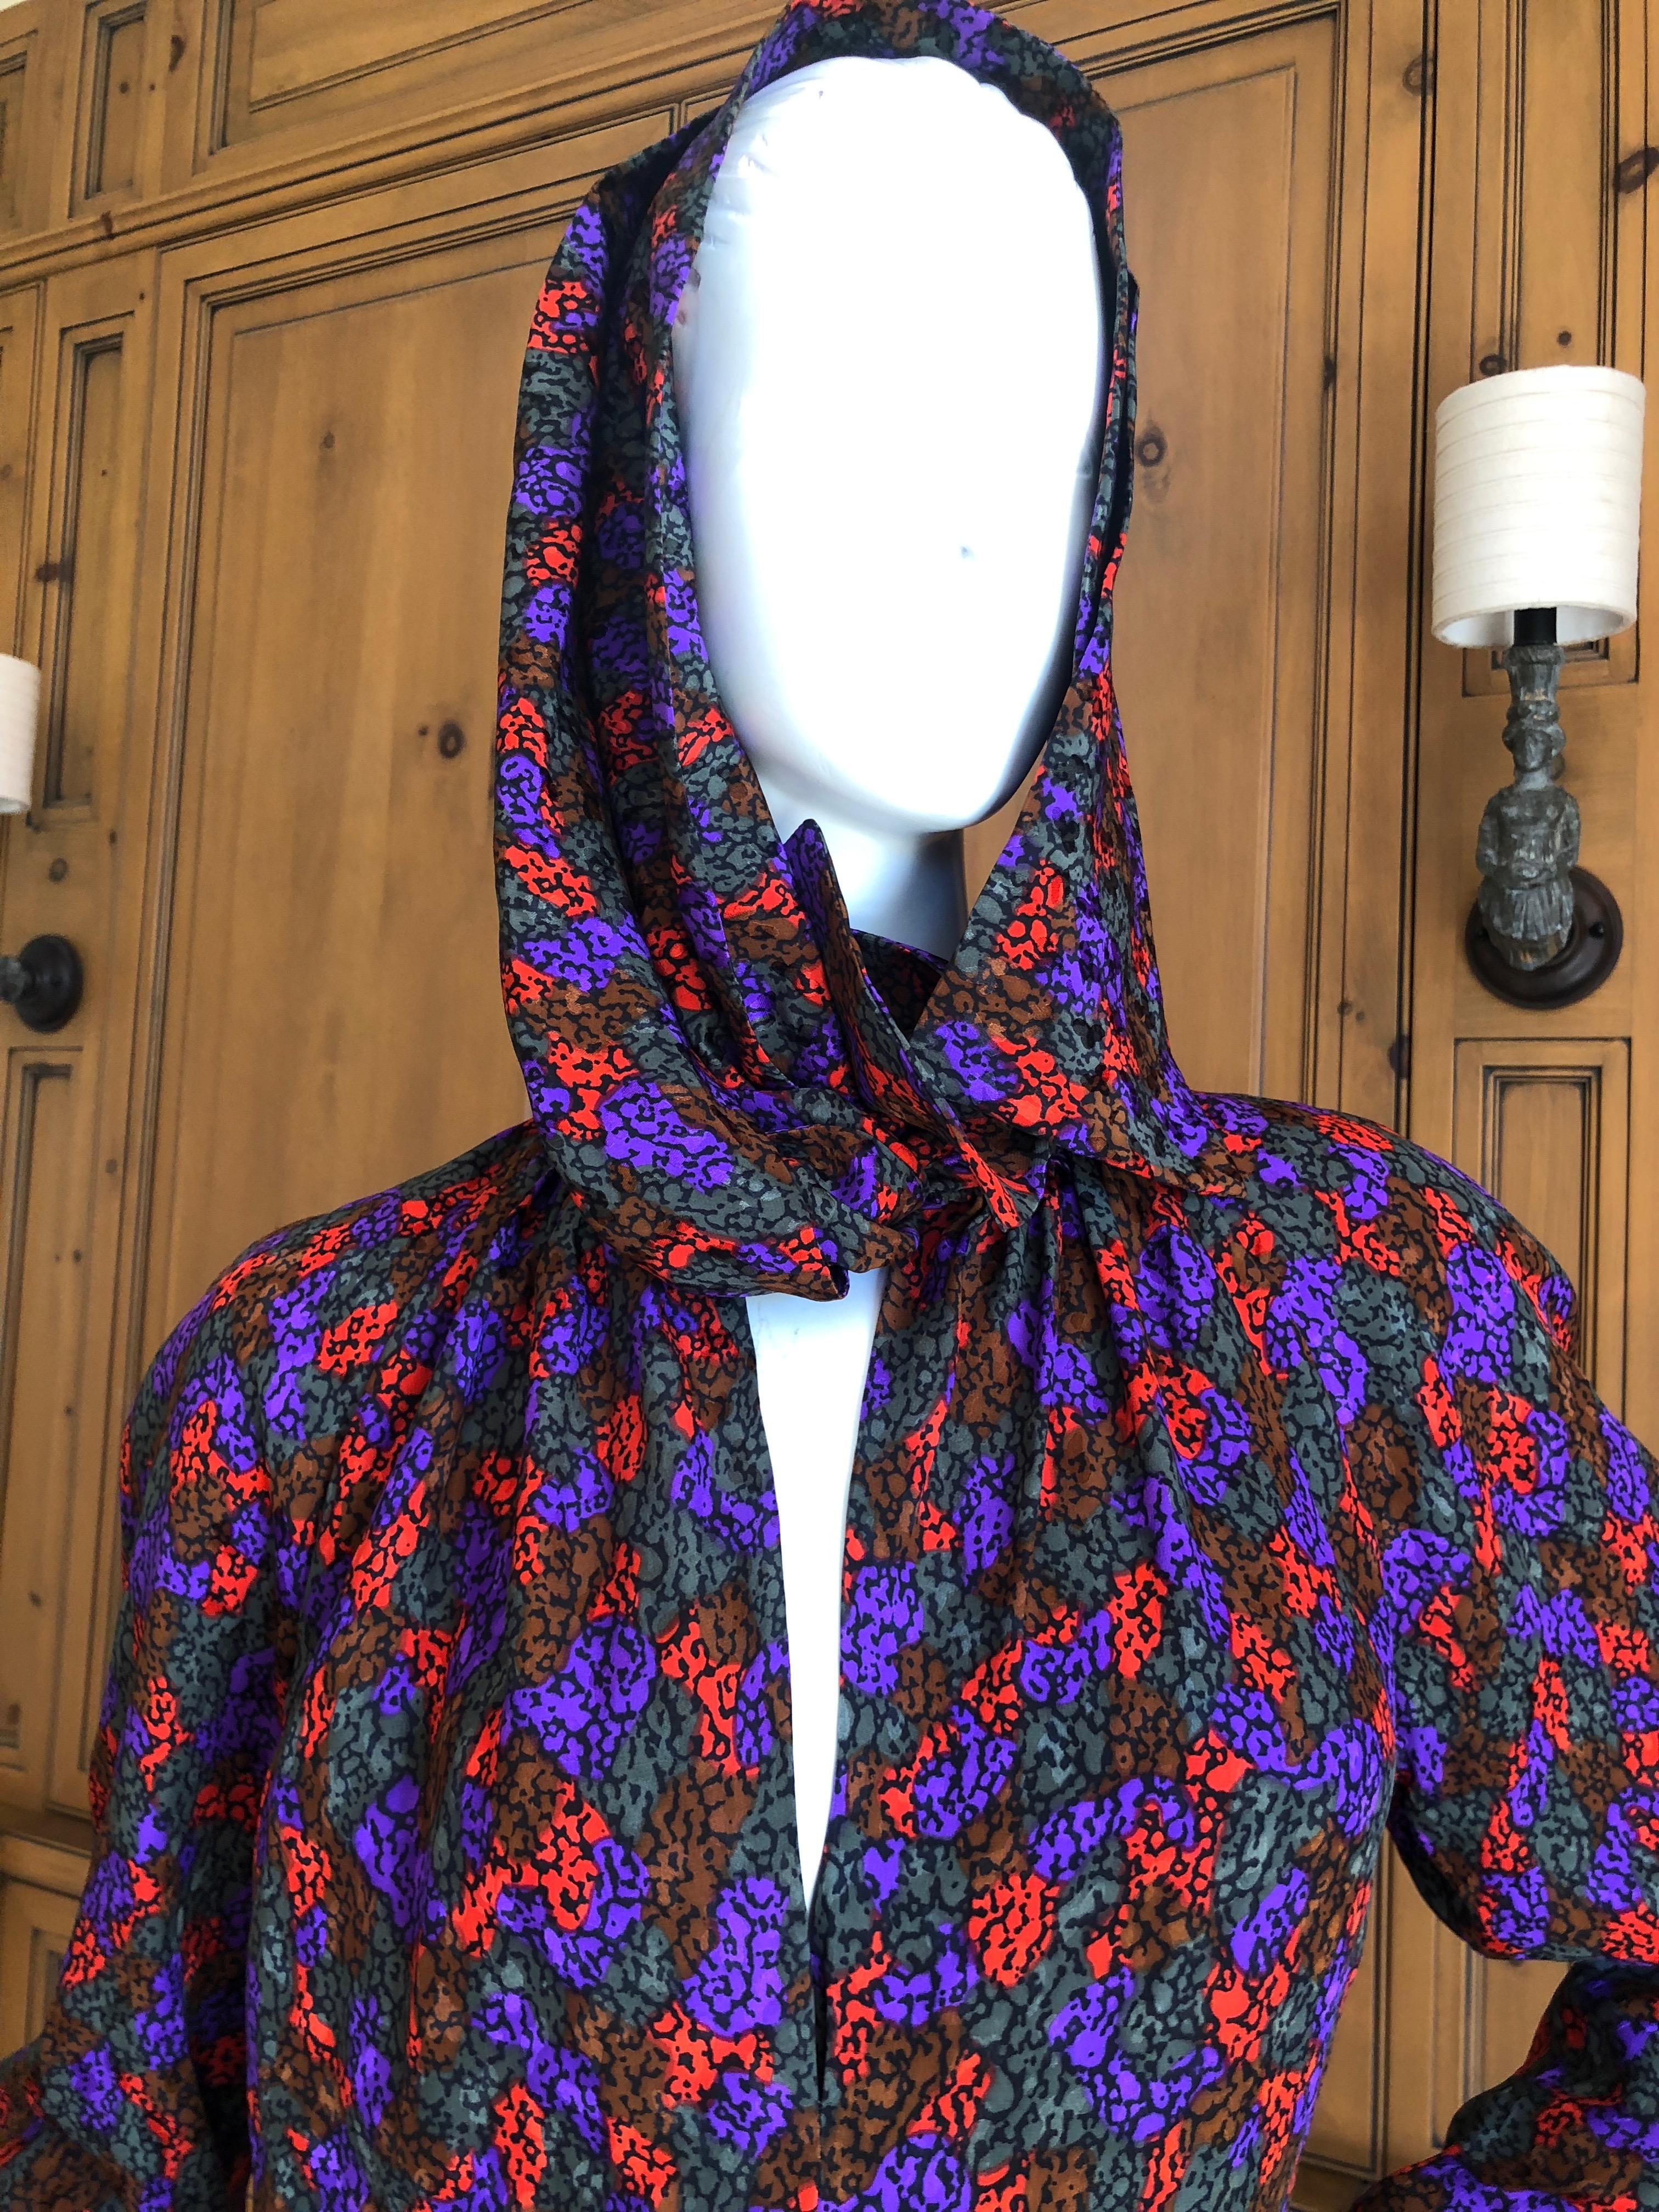 Yves Saint Laurent Rive Gauche 1970's Silk Low Cut Dress with Pussy Bow Ties For Sale 4